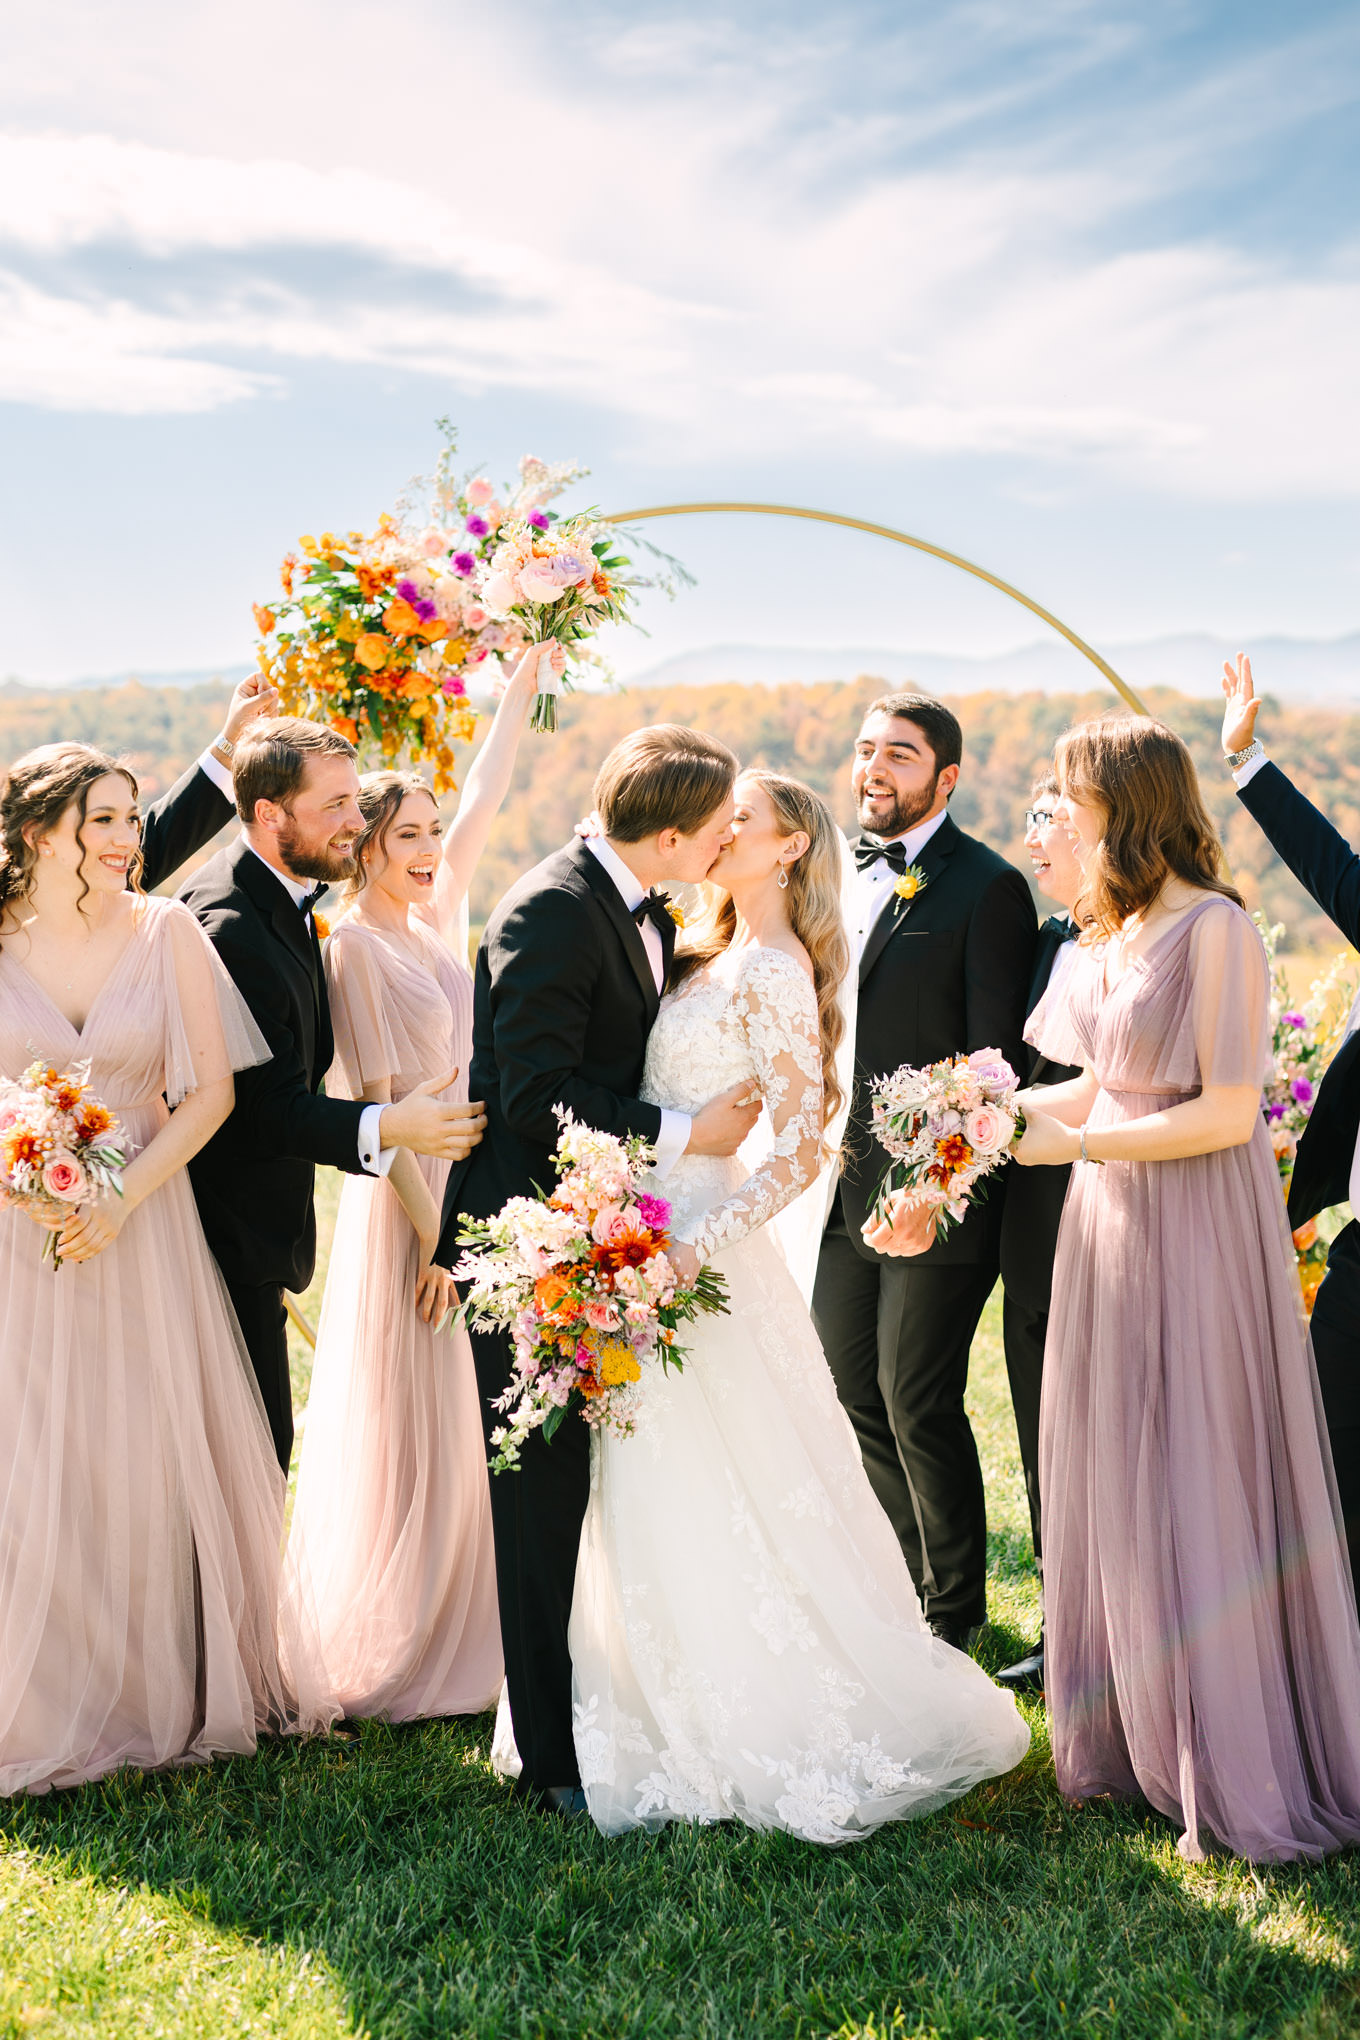 Biltmore Estate wedding in North Carolina | Wedding and elopement photography roundup | Los Angeles and Palm Springs photographer | #losangeleswedding #palmspringswedding #elopementphotographer Source: Mary Costa Photography | Los Angeles